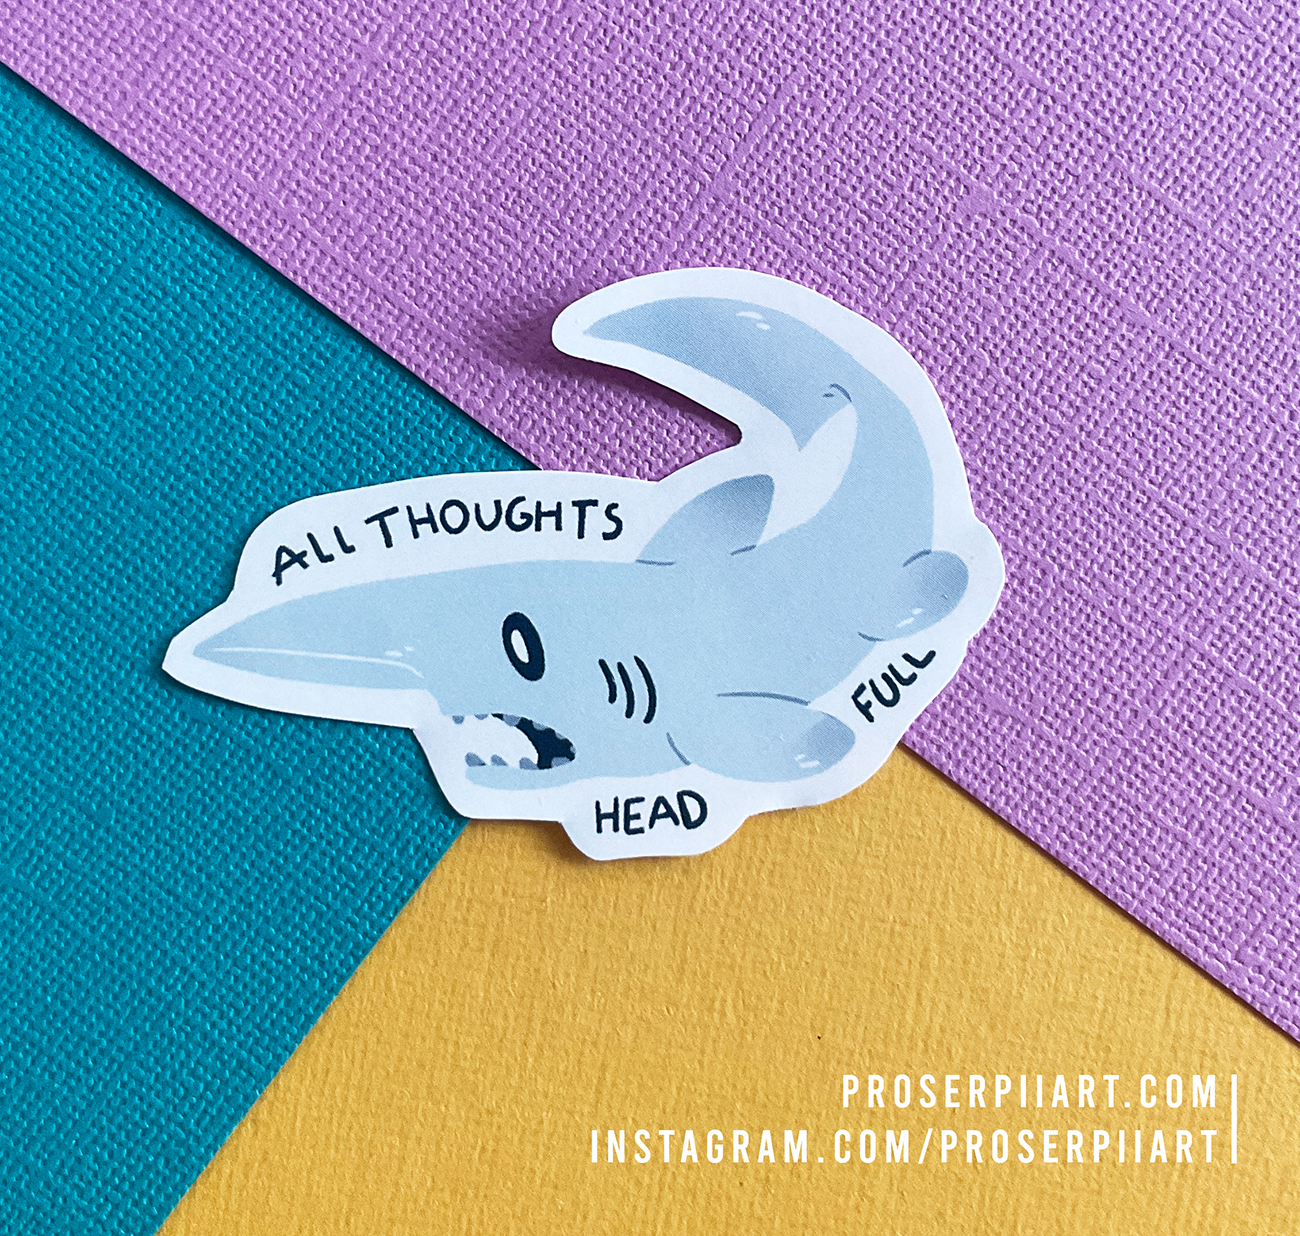 Shark Stickers! // Cute Sharks Sticker Pack // No Thoughts Head Empty